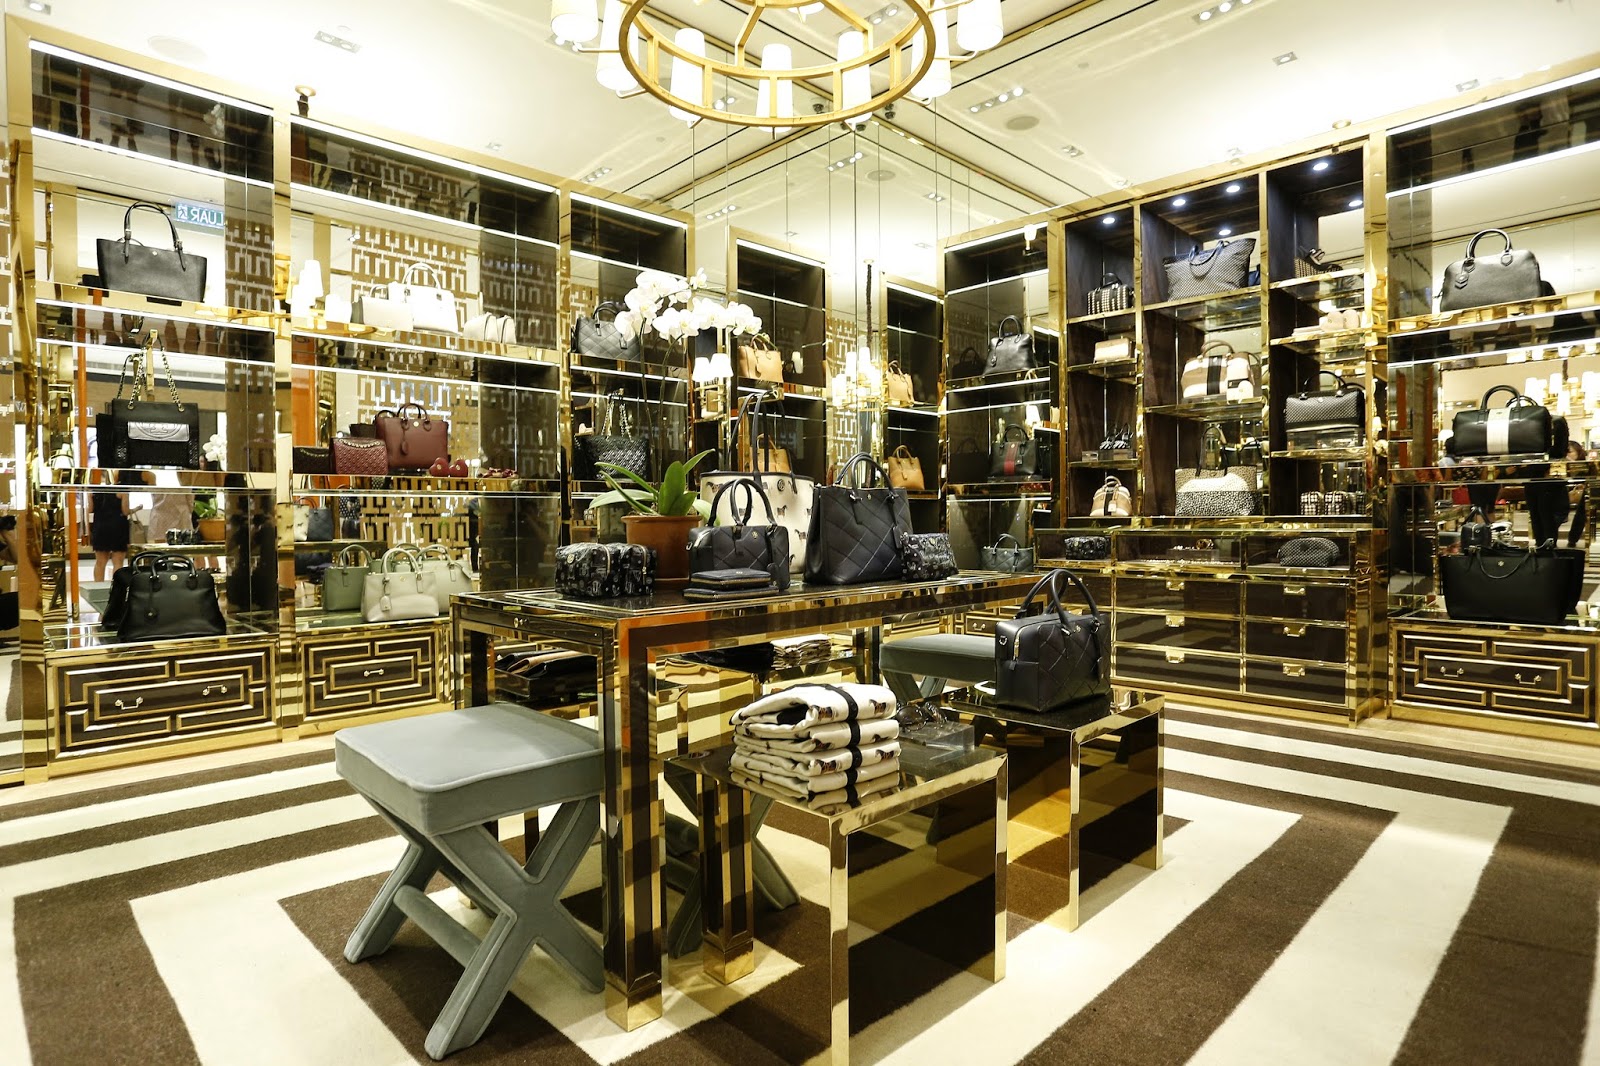 Store Explore: Chanel welcomes you to new shoe store in Pavilion KL